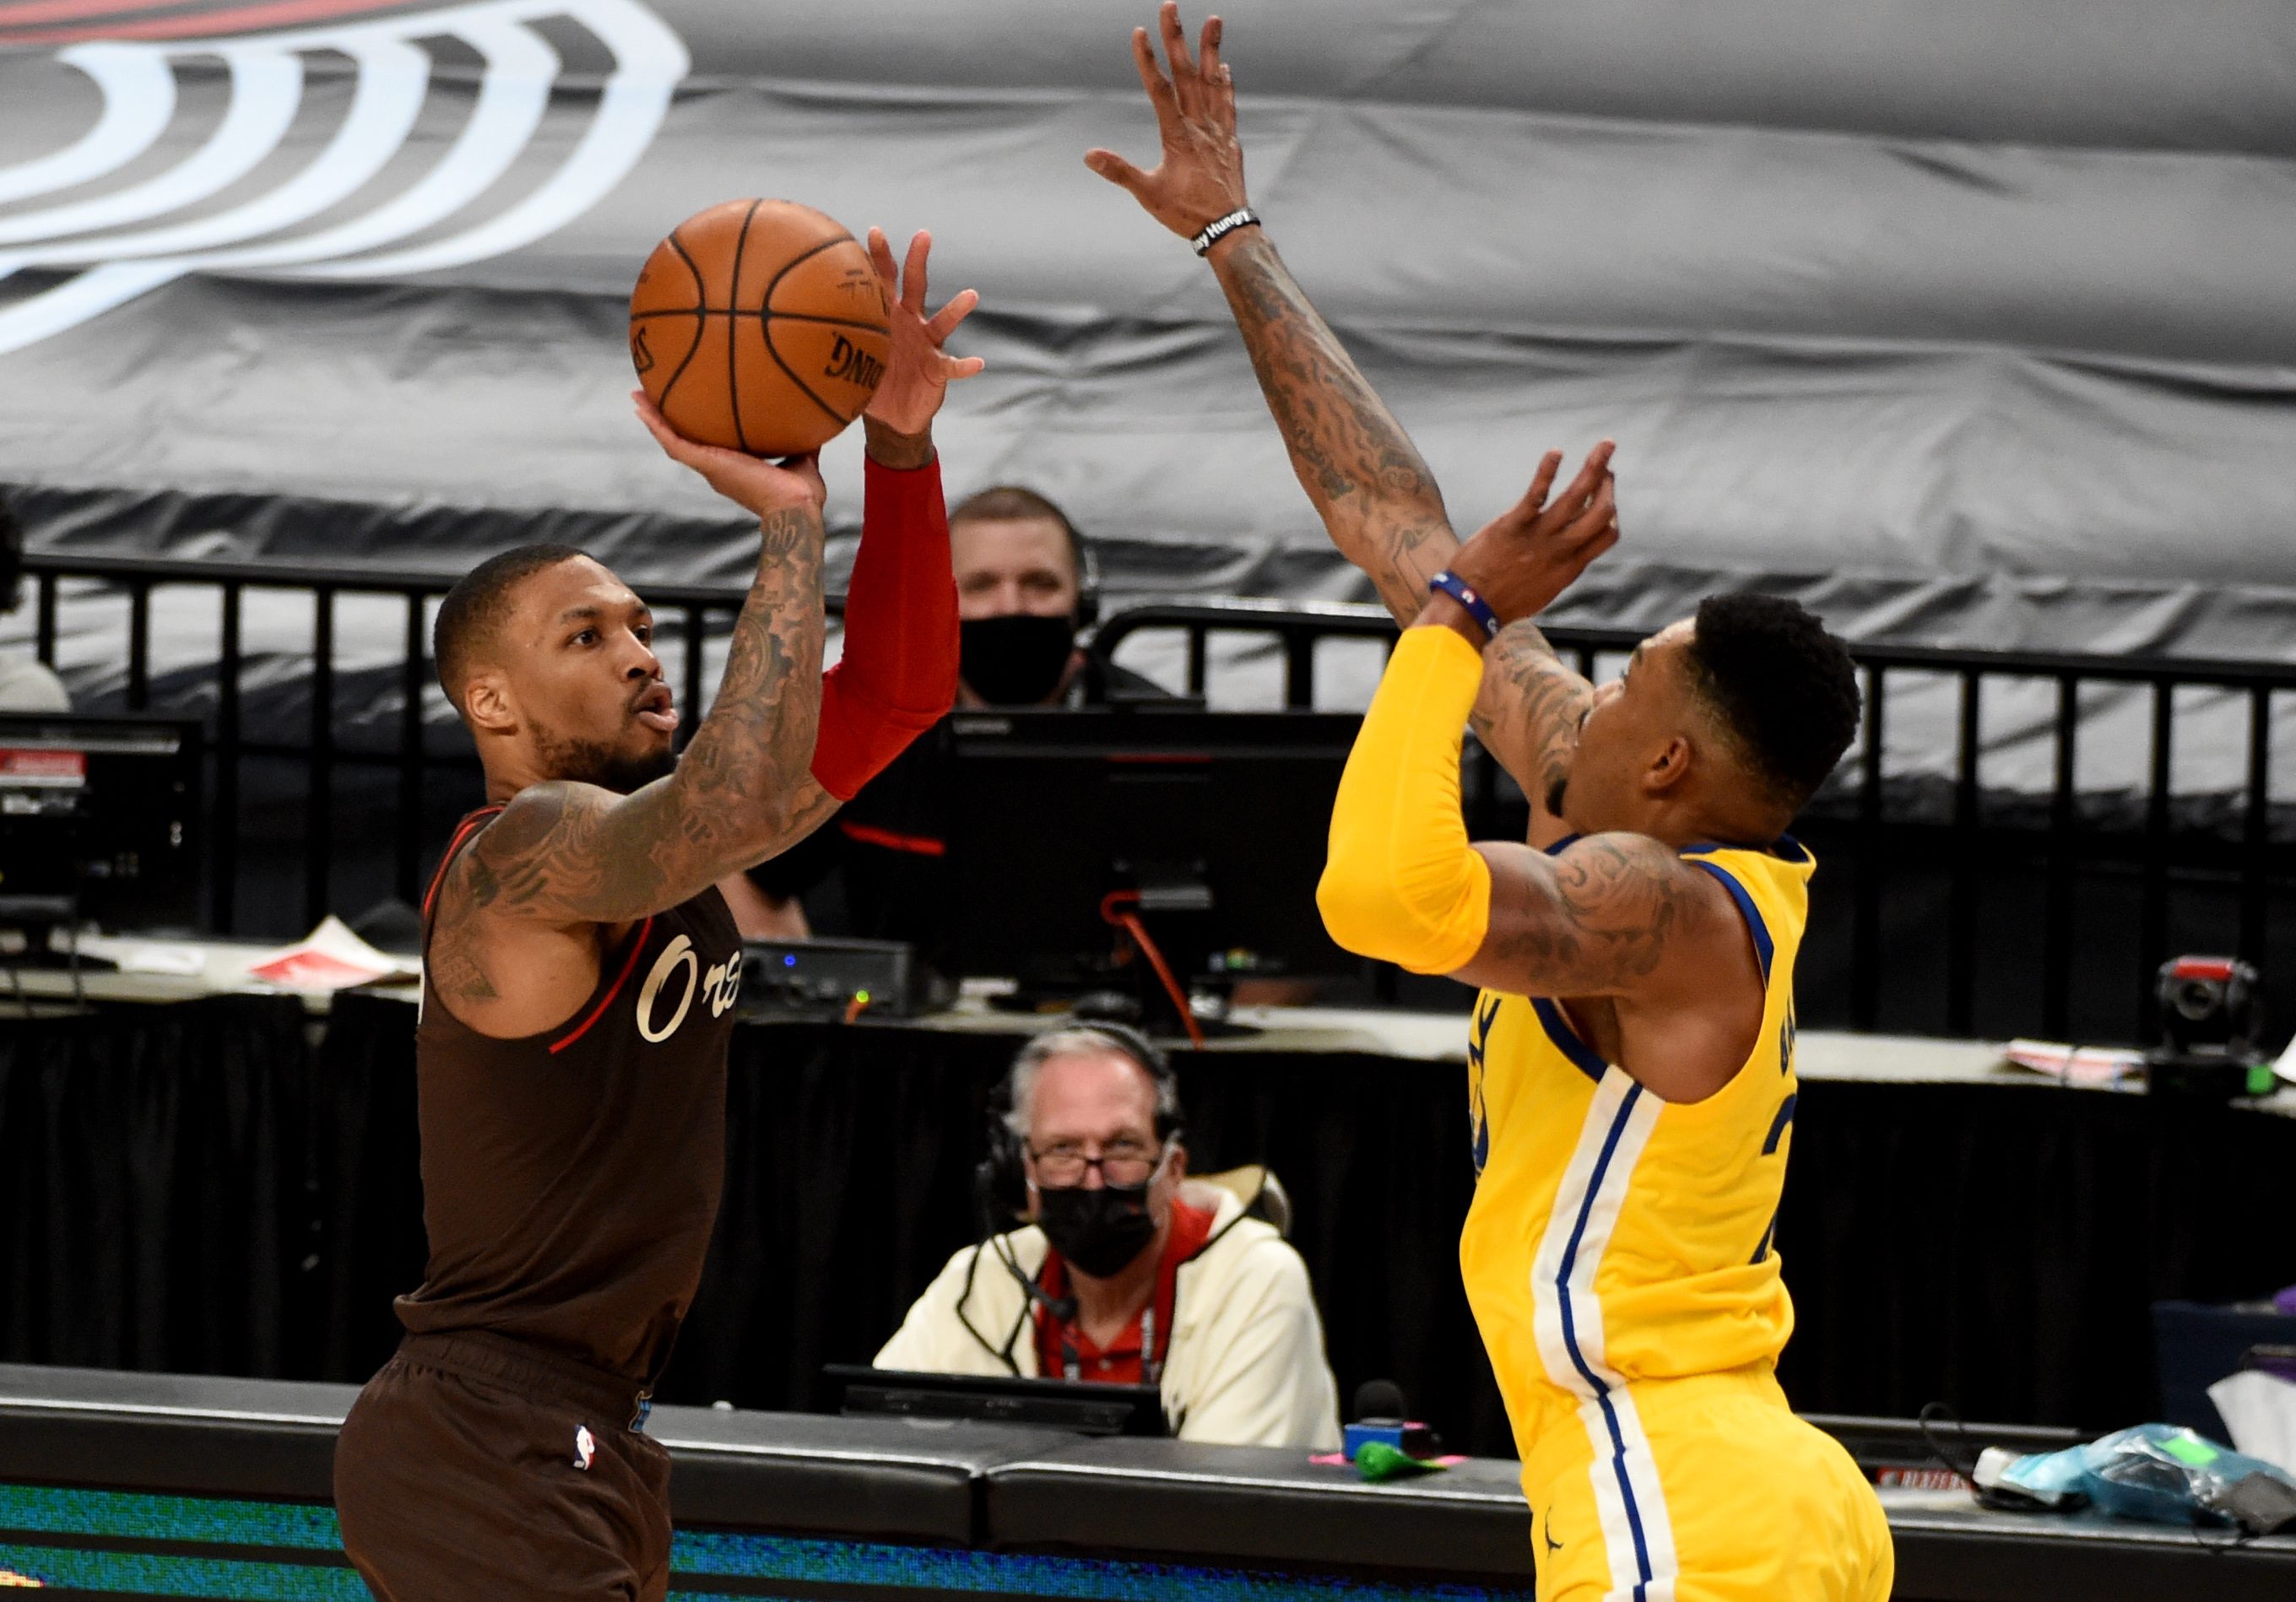 Dame Time: How Damian Lillard put away the Warriors in the clutch